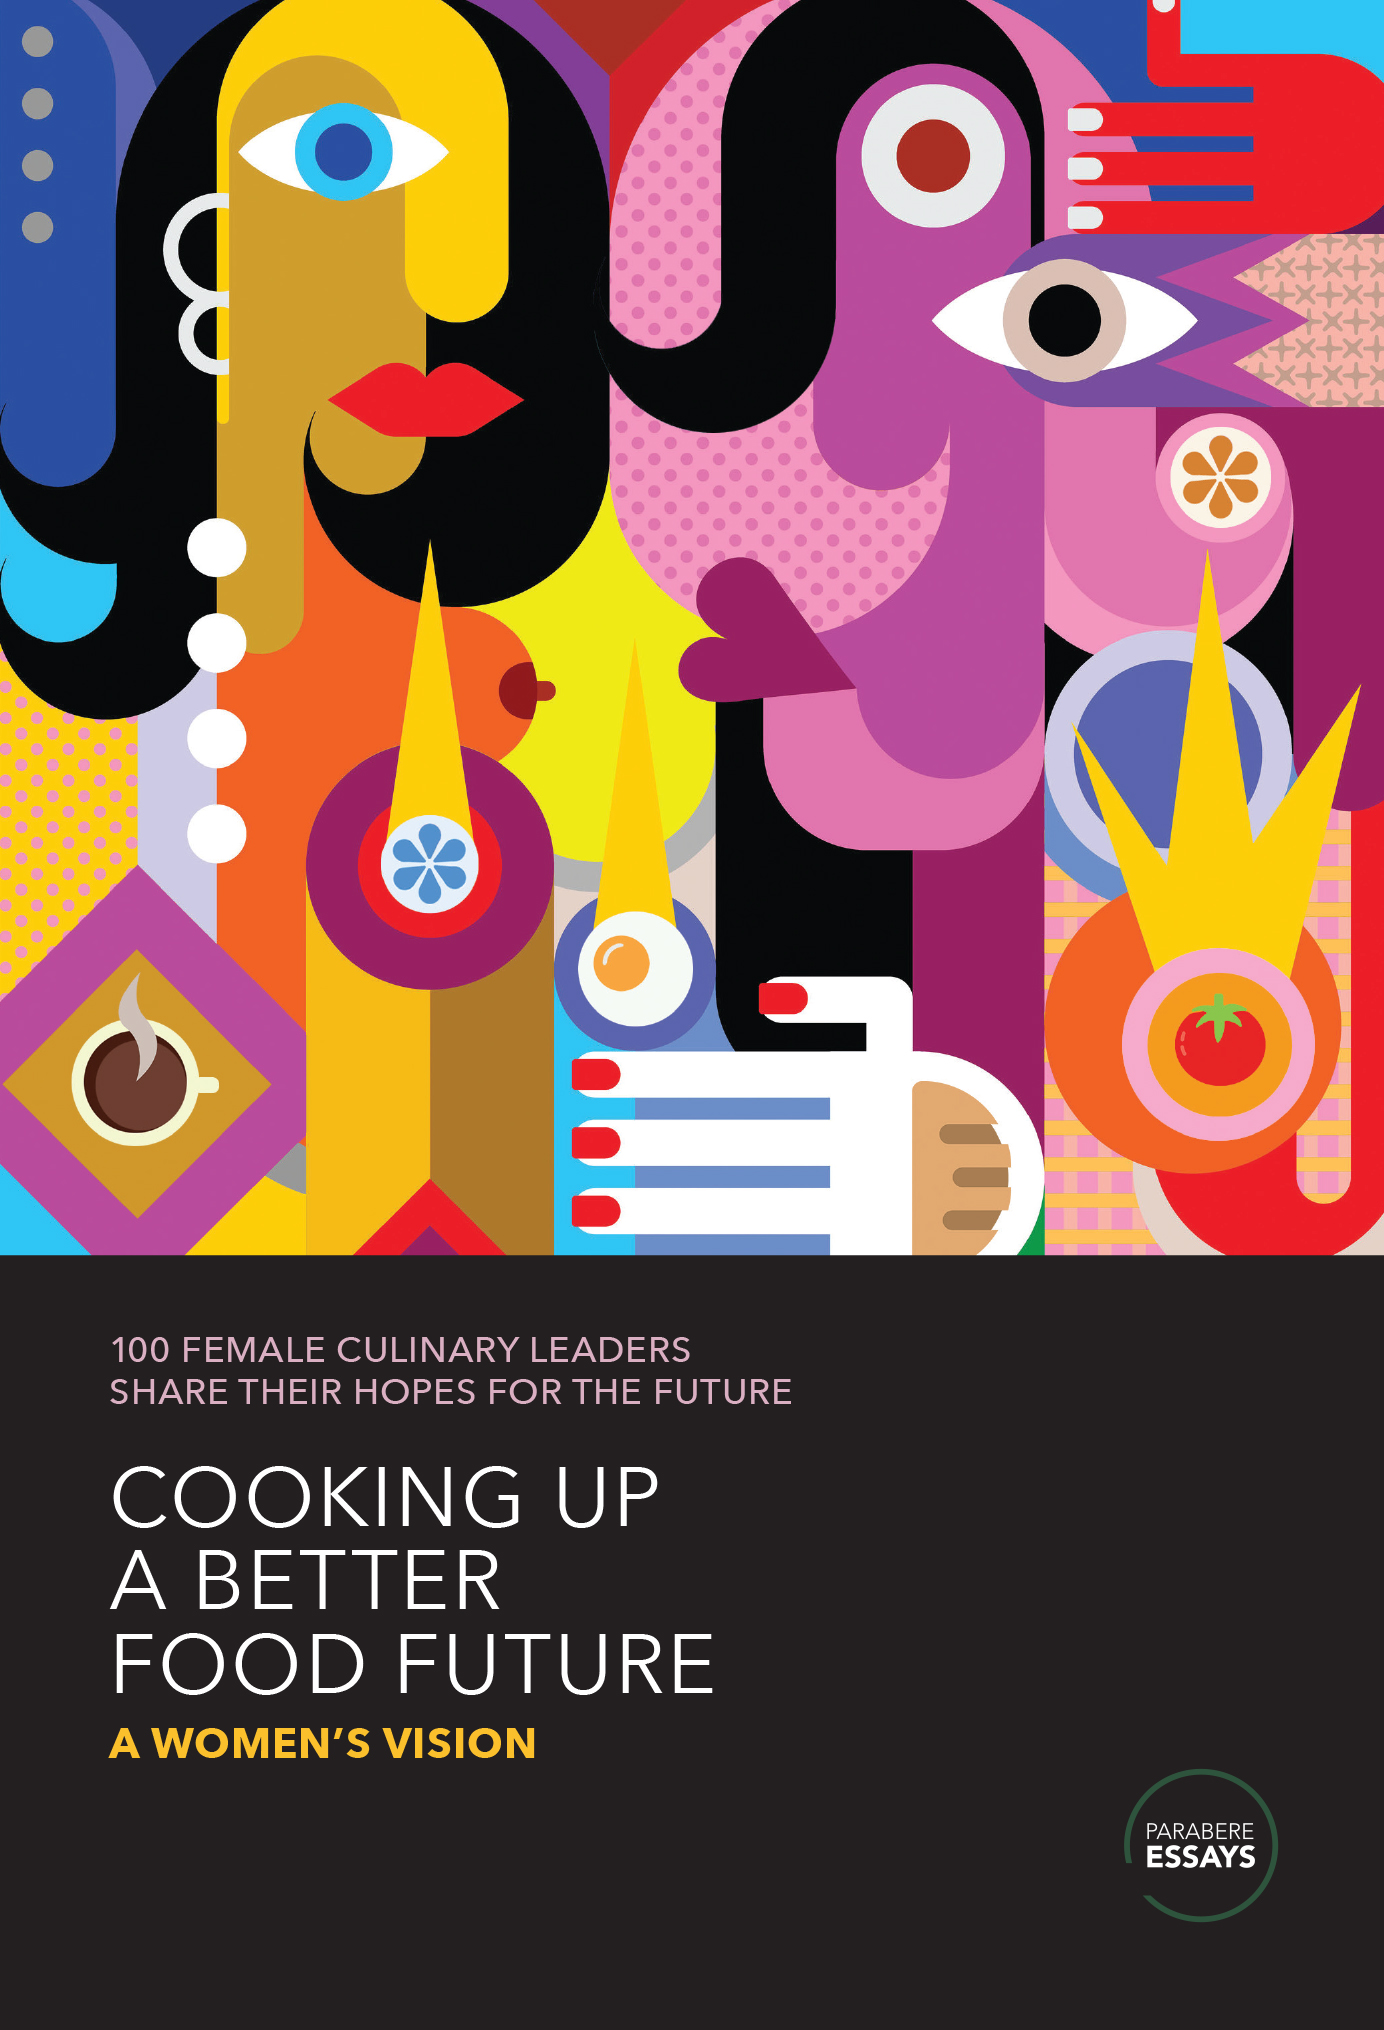 FoodFuture_frontcover